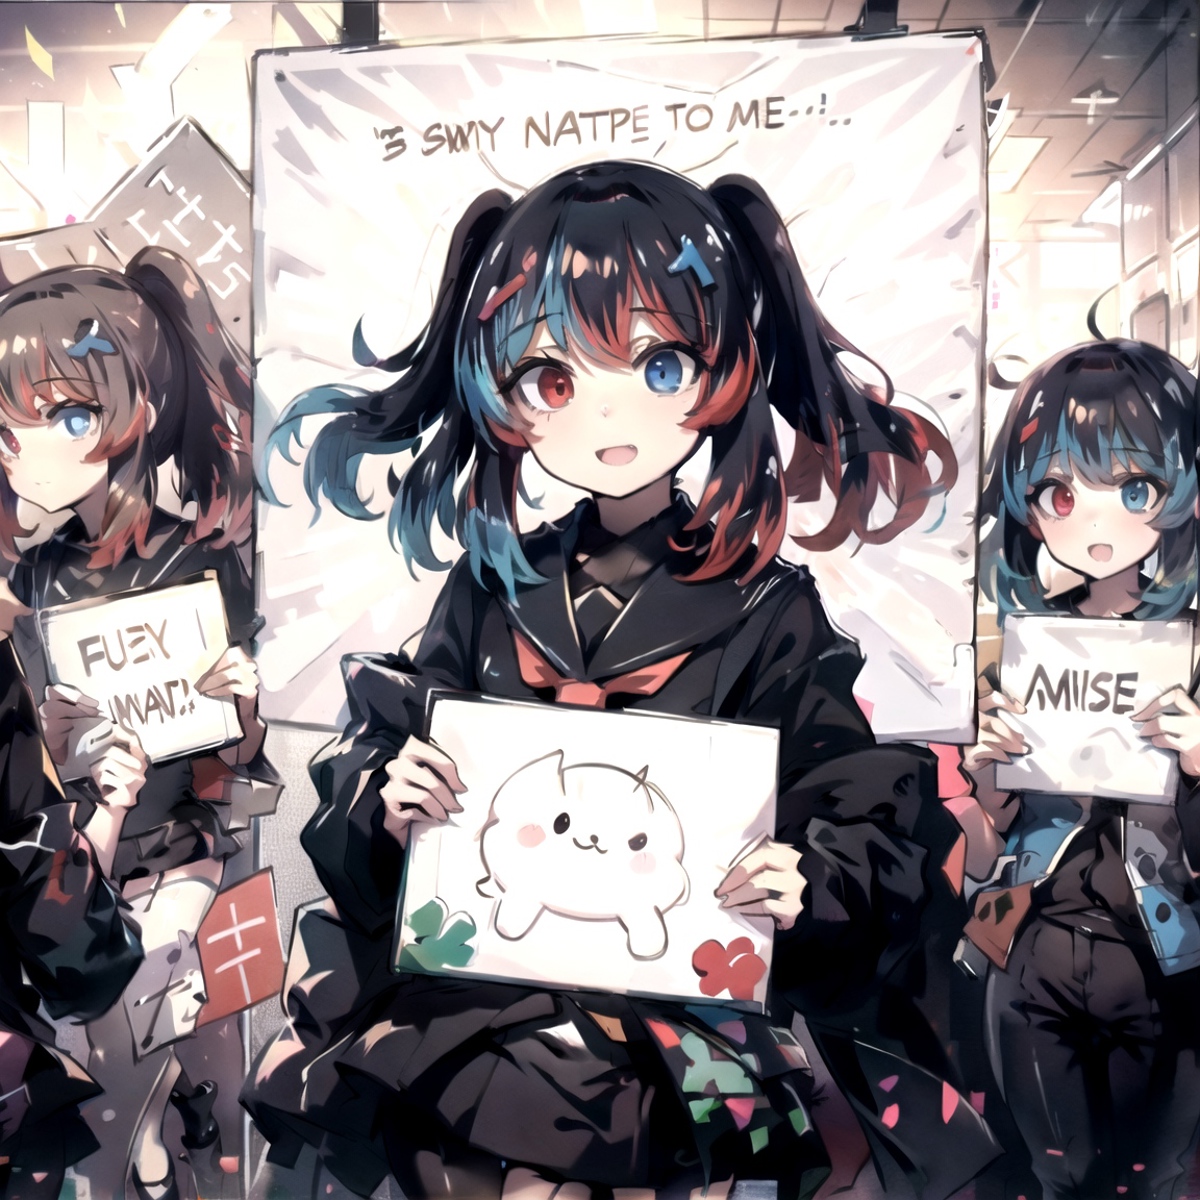 Anime Girls Holding Signs image by PotatCat